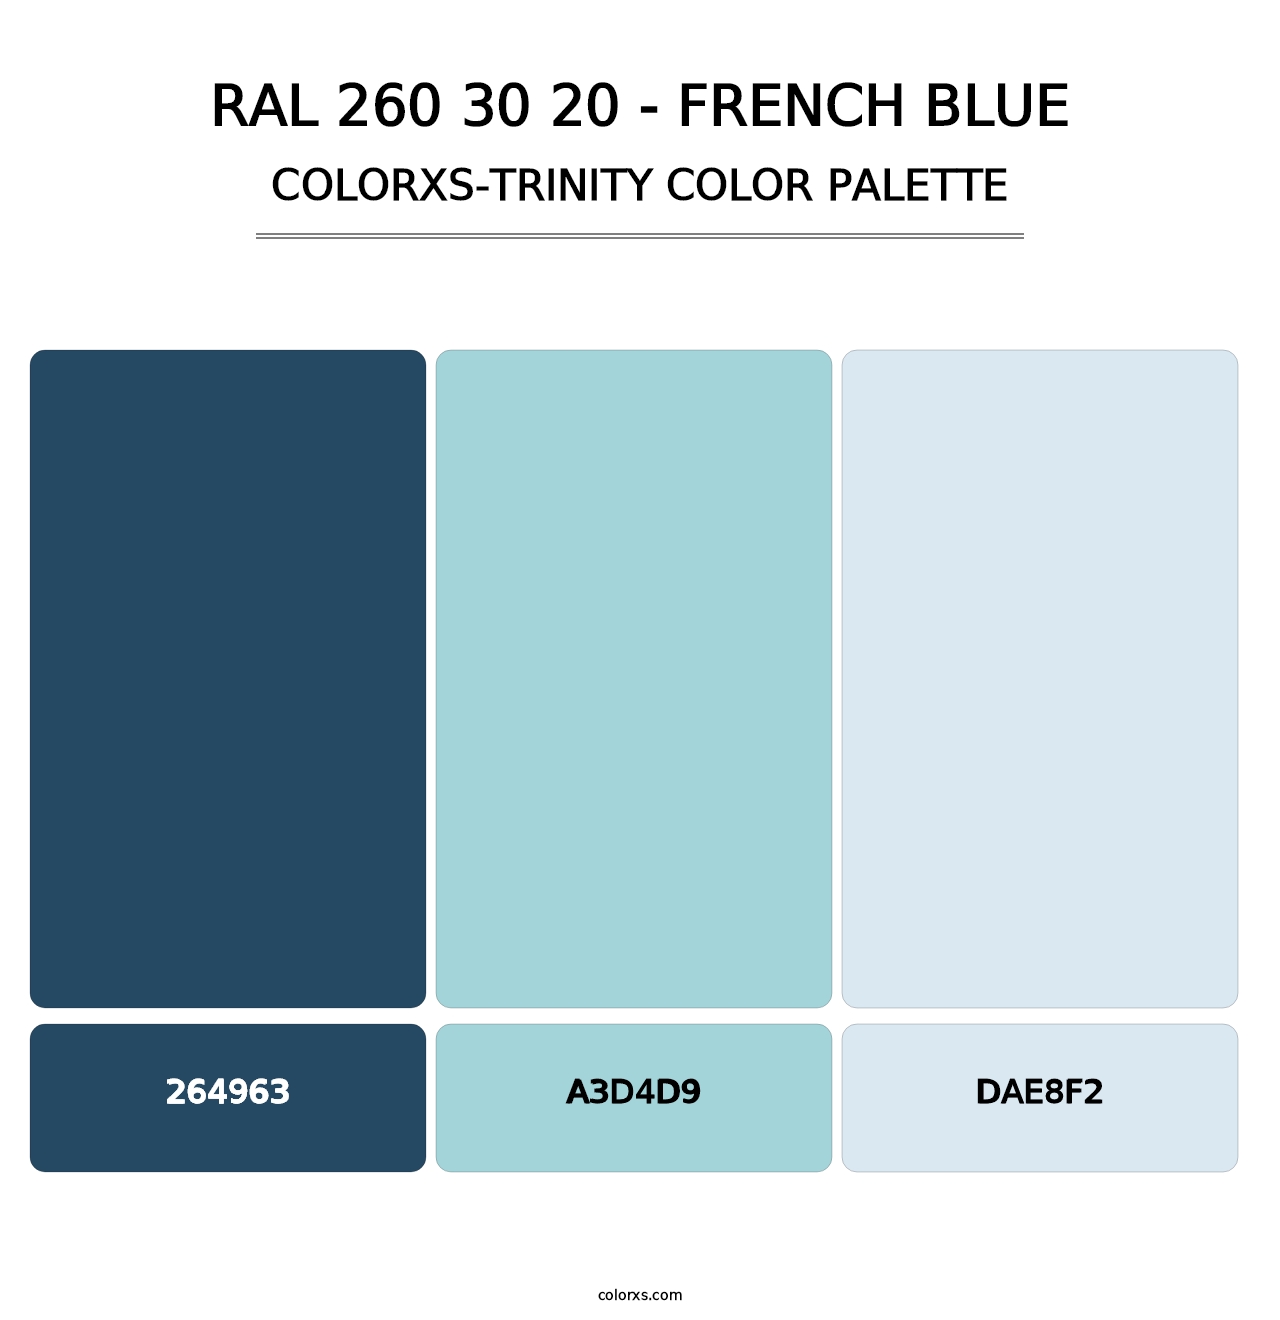 RAL 260 30 20 - French Blue - Colorxs Trinity Palette